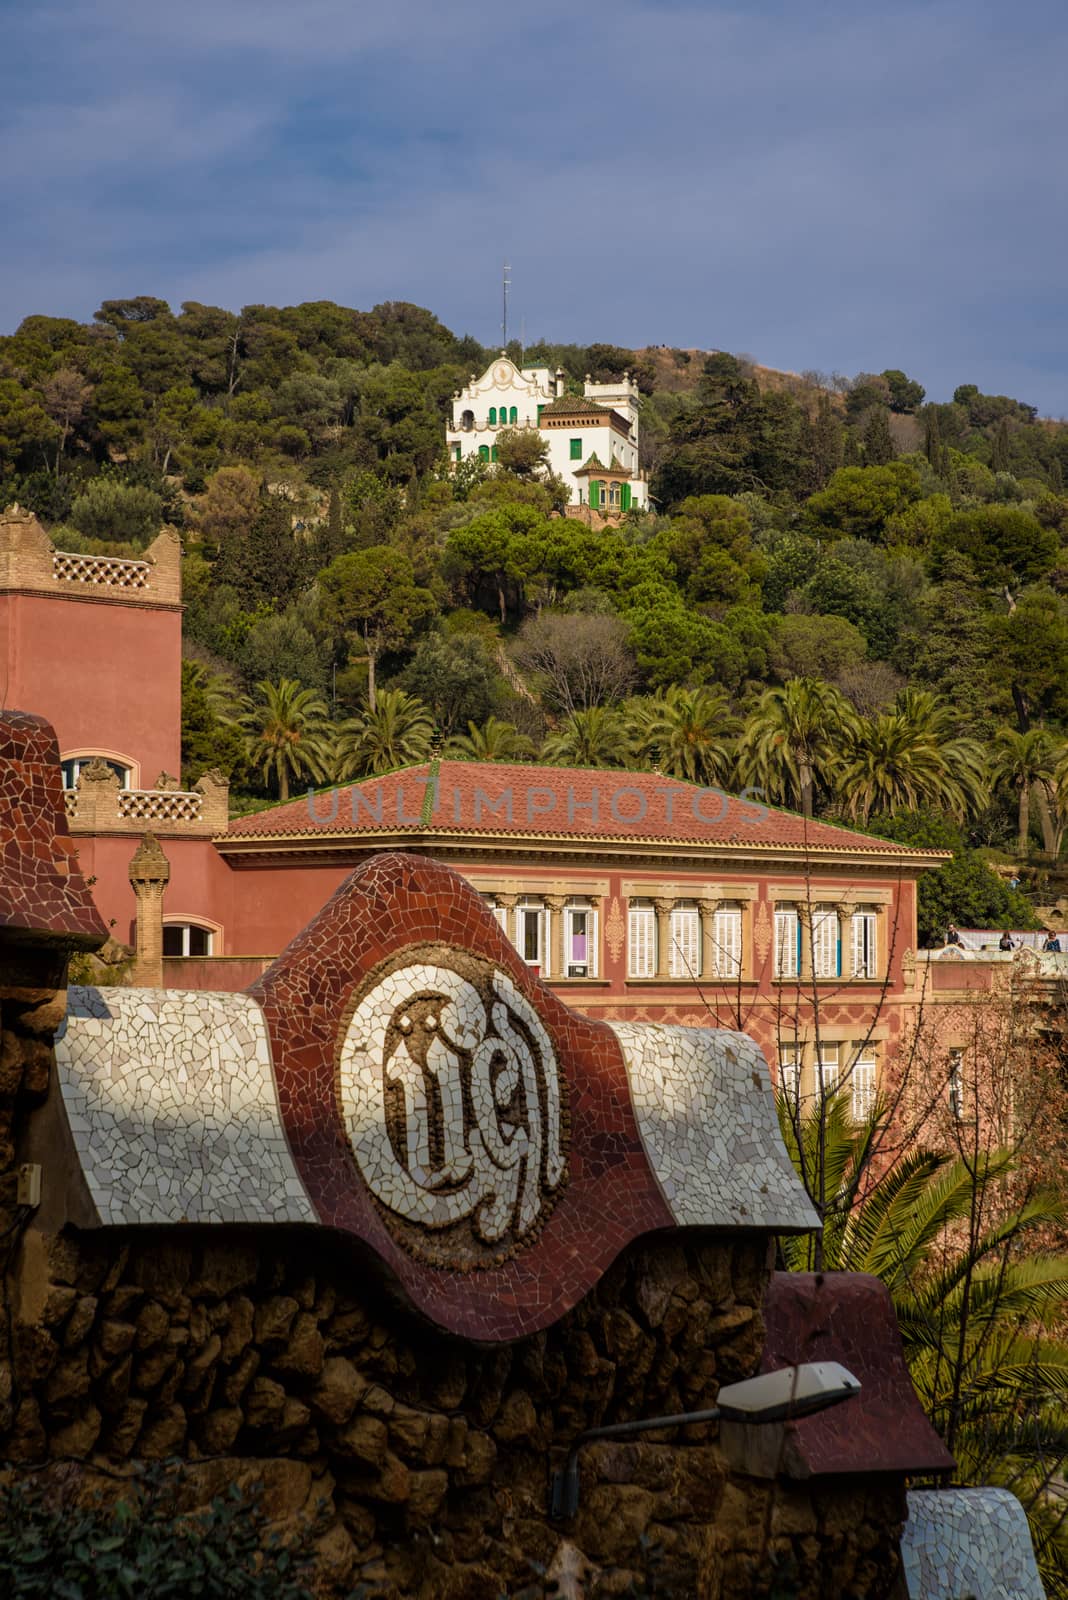 Park Guell, populart tourit attraction in Barcelona, Spain.